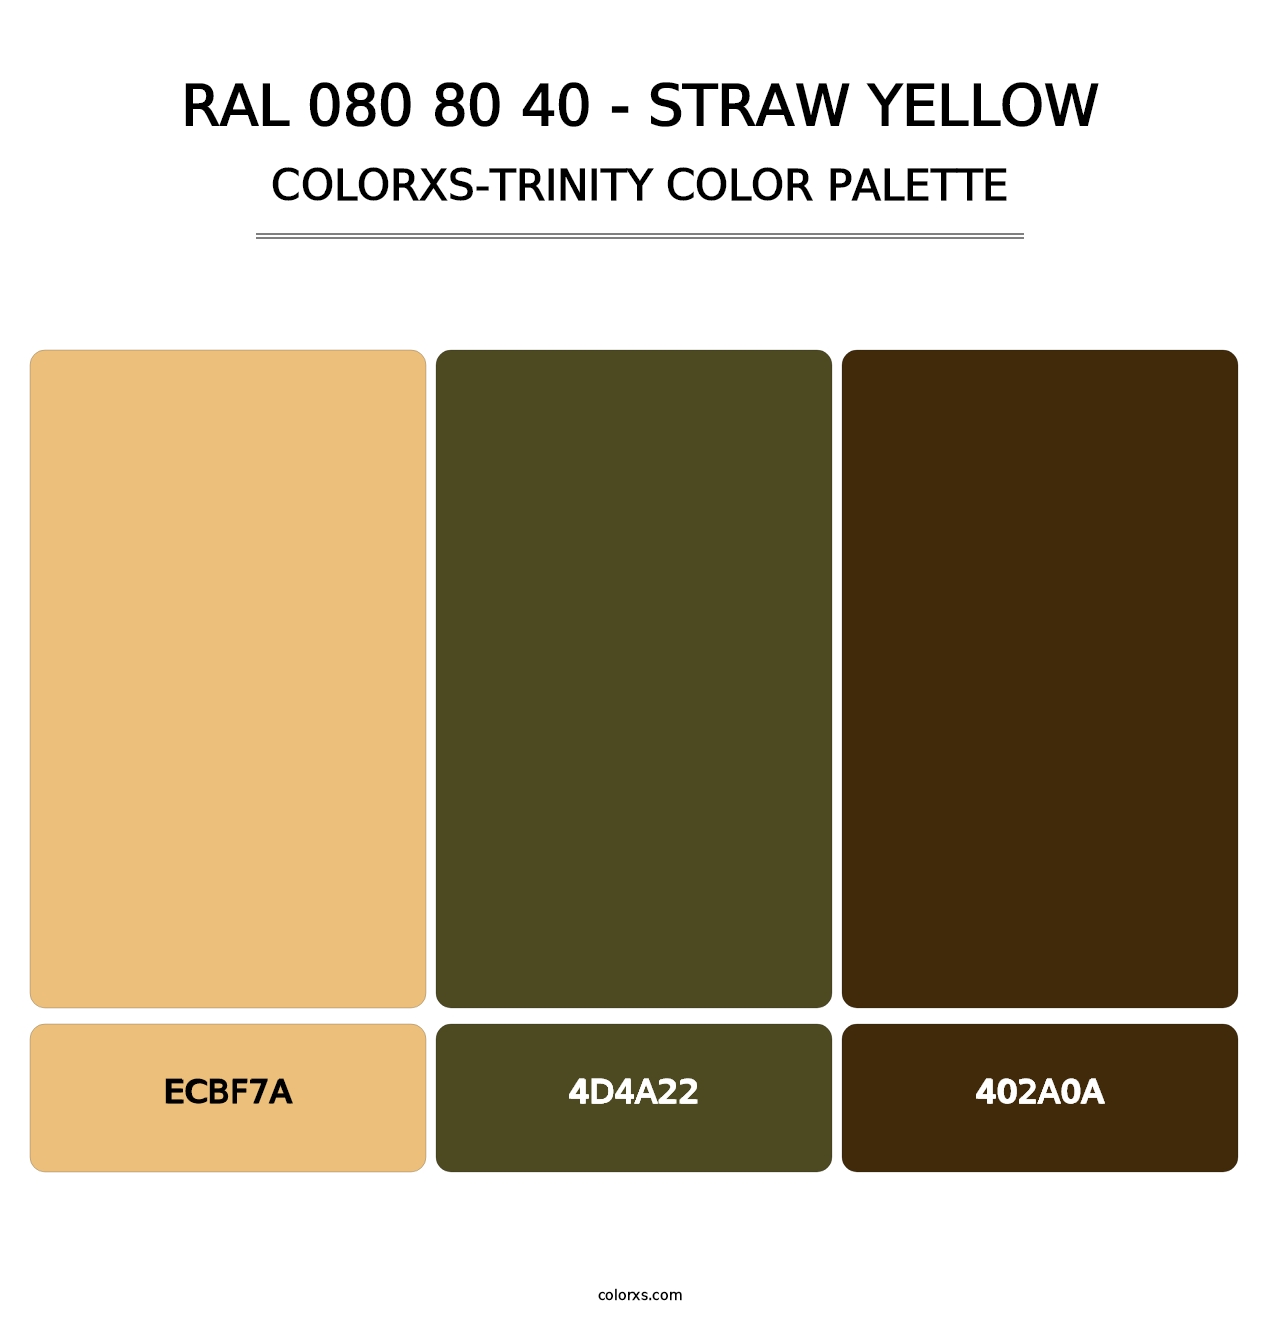 RAL 080 80 40 - Straw Yellow - Colorxs Trinity Palette